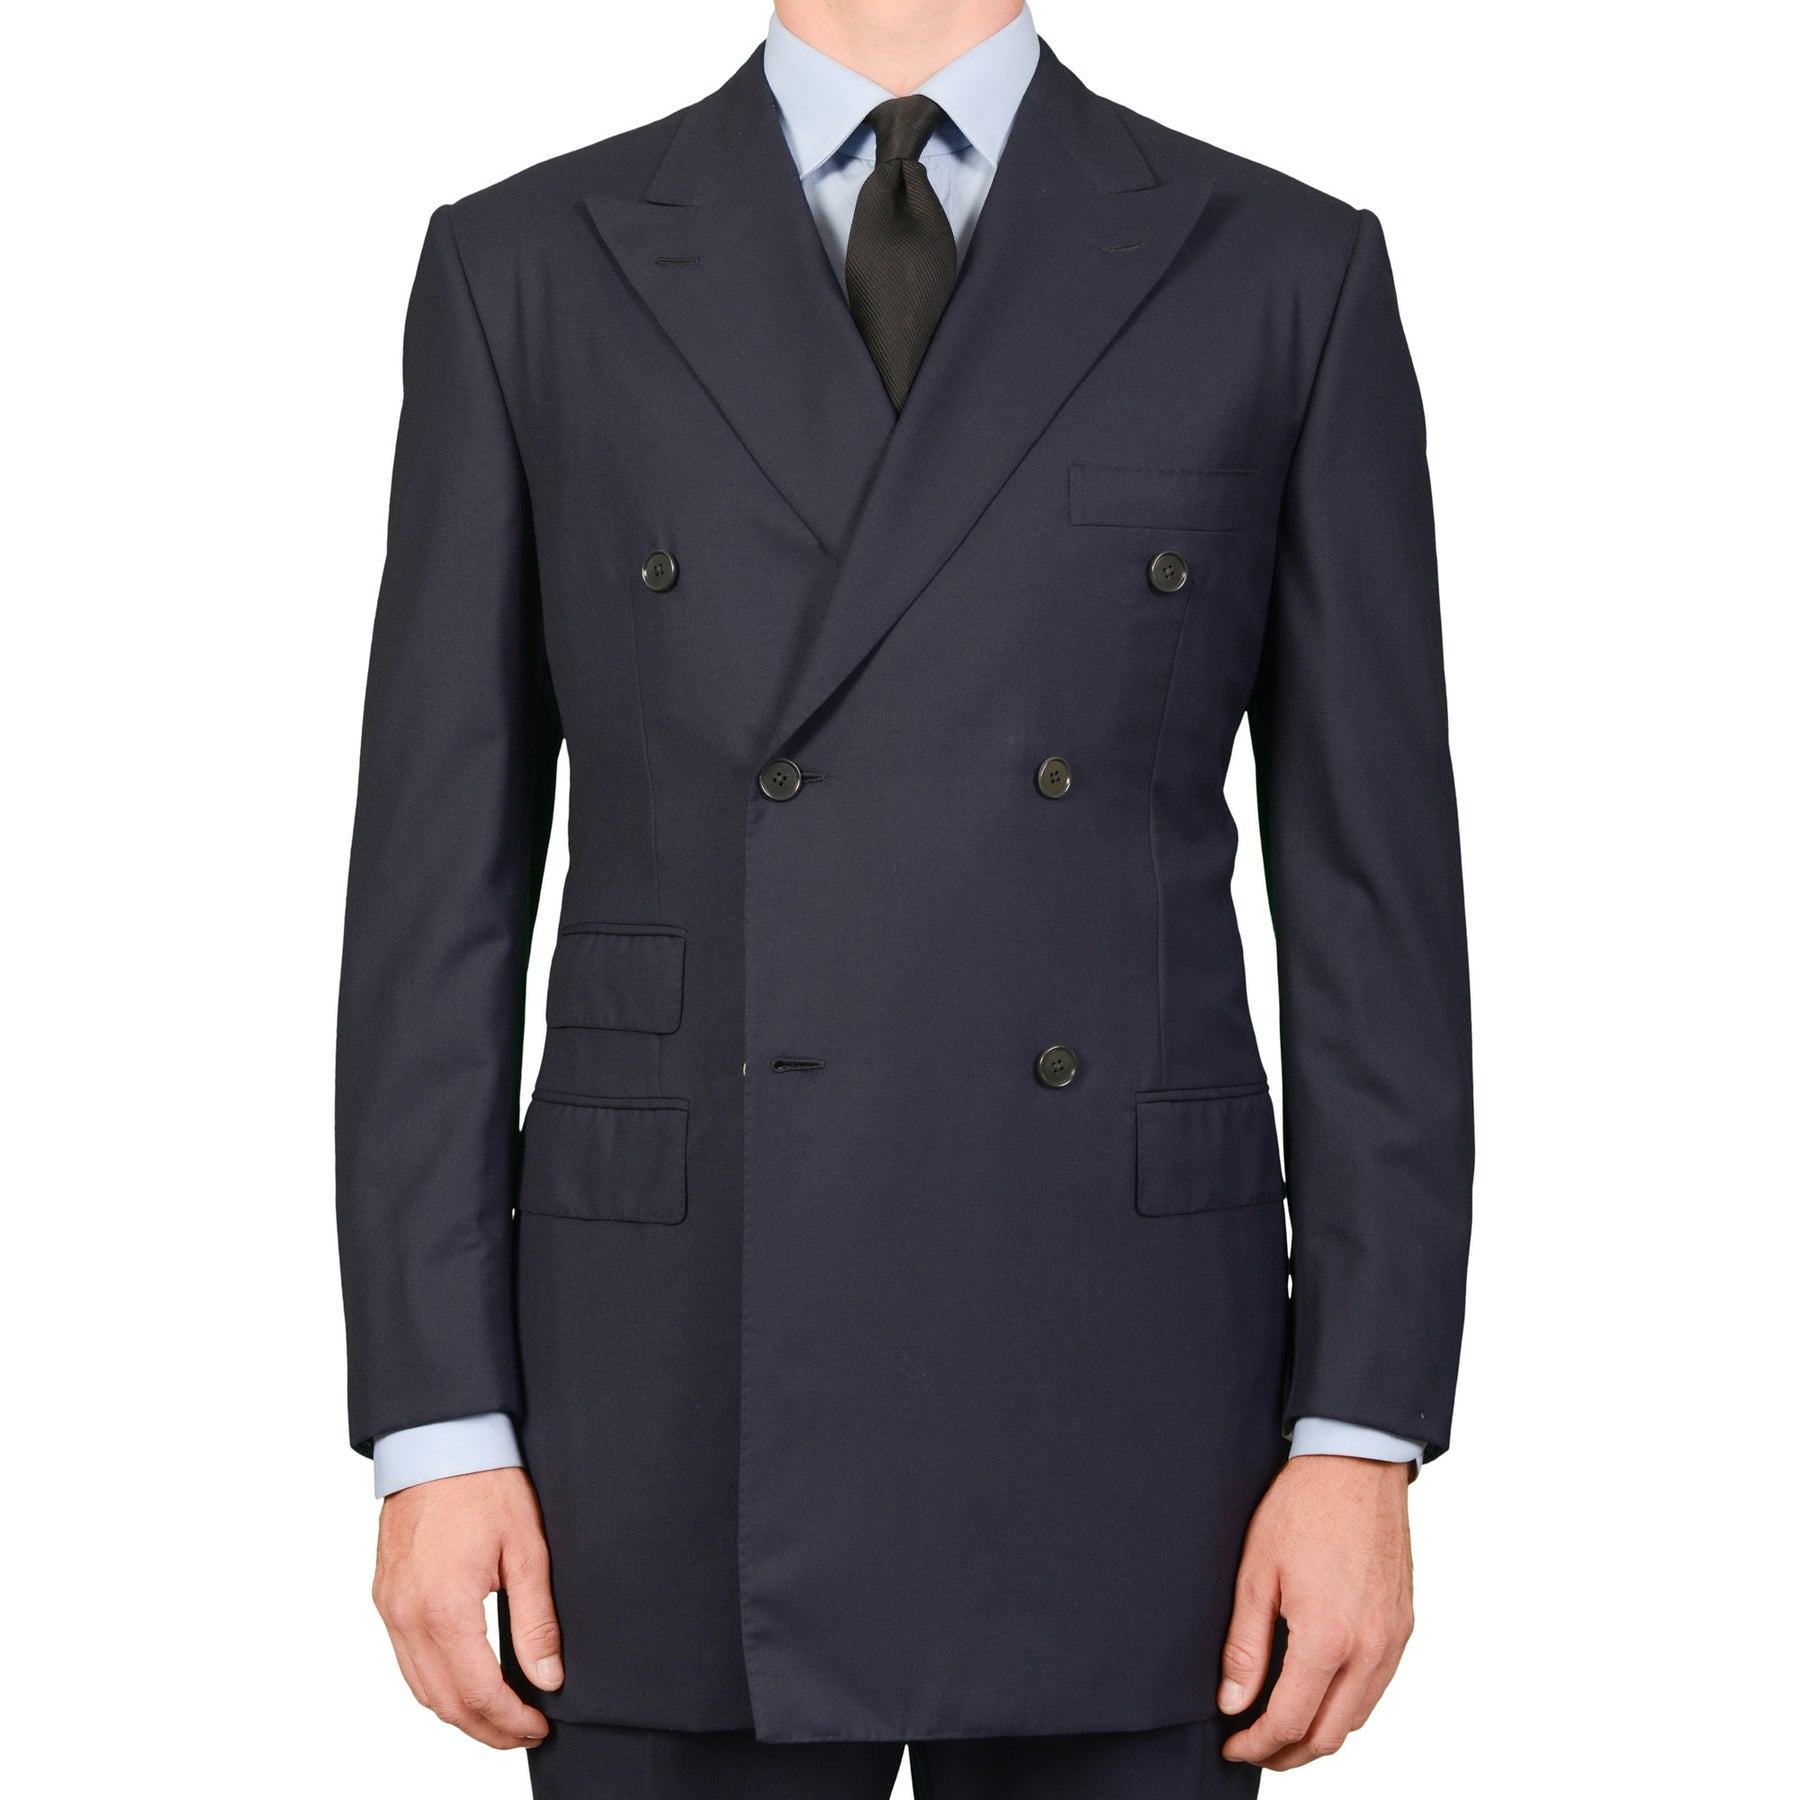 GIEVES & HAWKES Navy Blue Textured Wool Super 150's DB Suit 51 NEW US